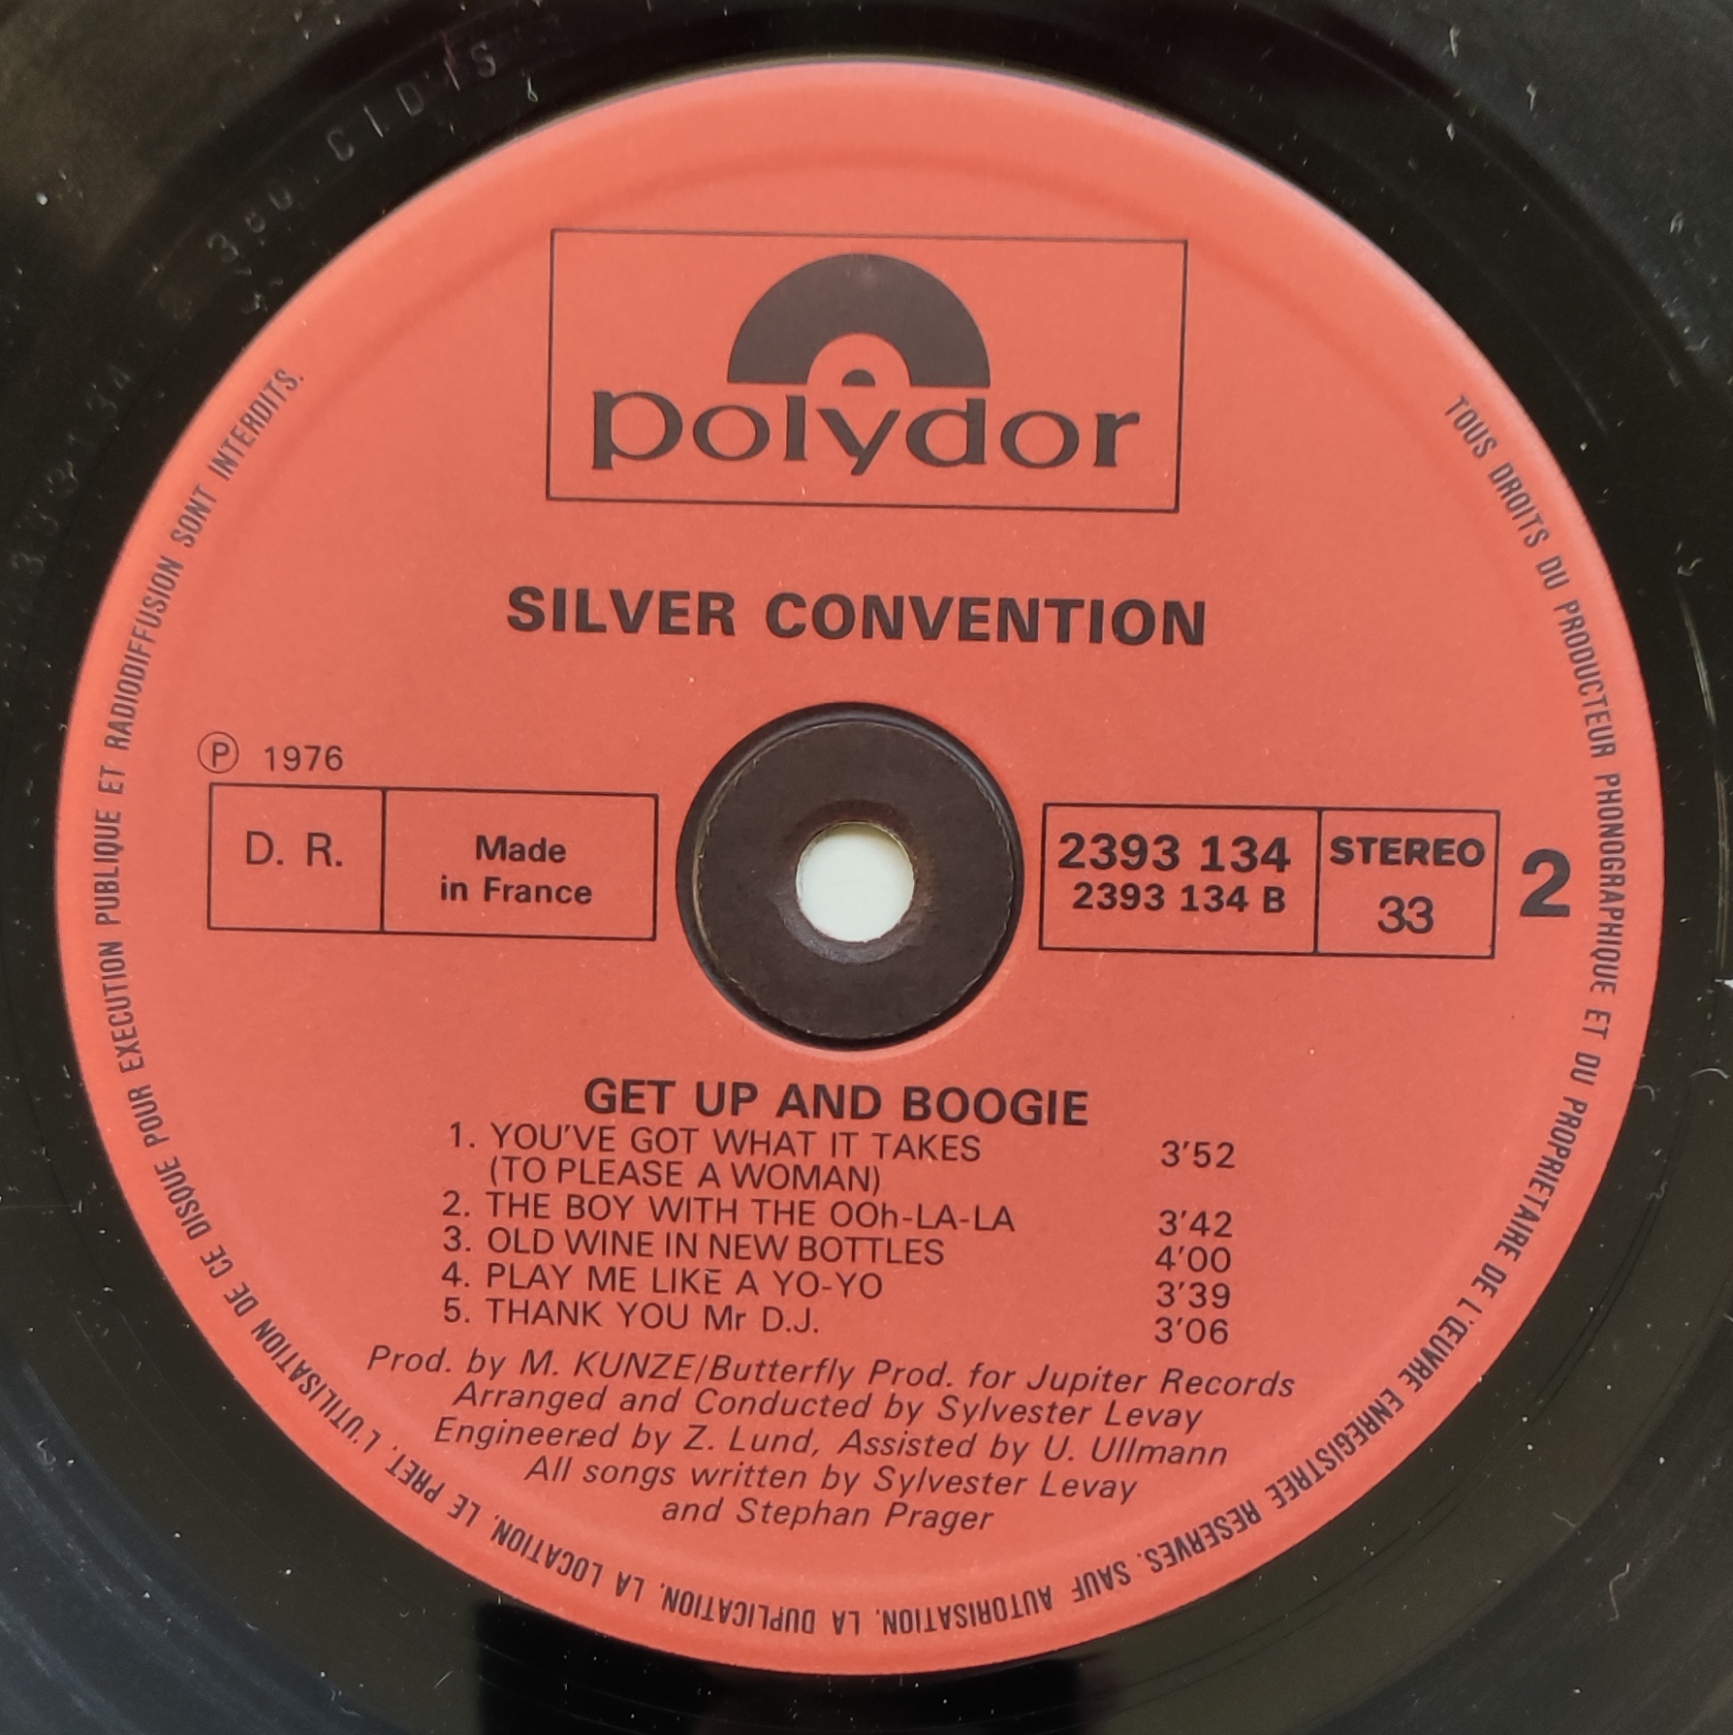 SILVER CONVENTION - Get up and boogie - 1976 - France - Polydor